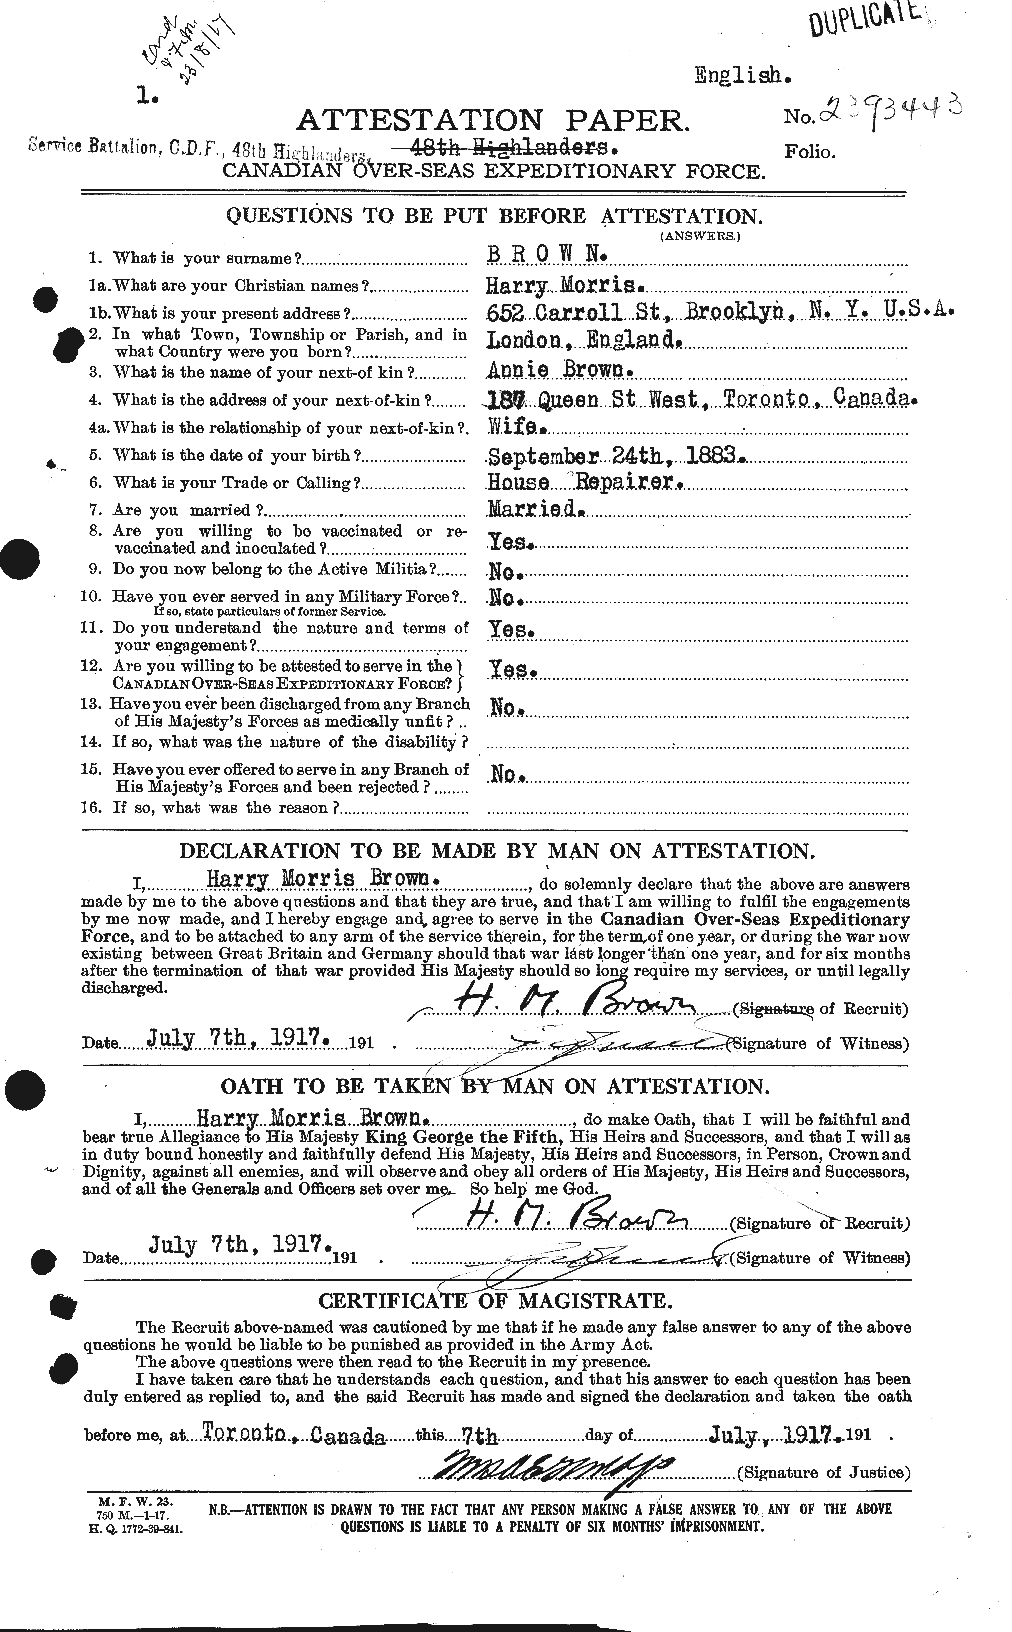 Personnel Records of the First World War - CEF 265462a